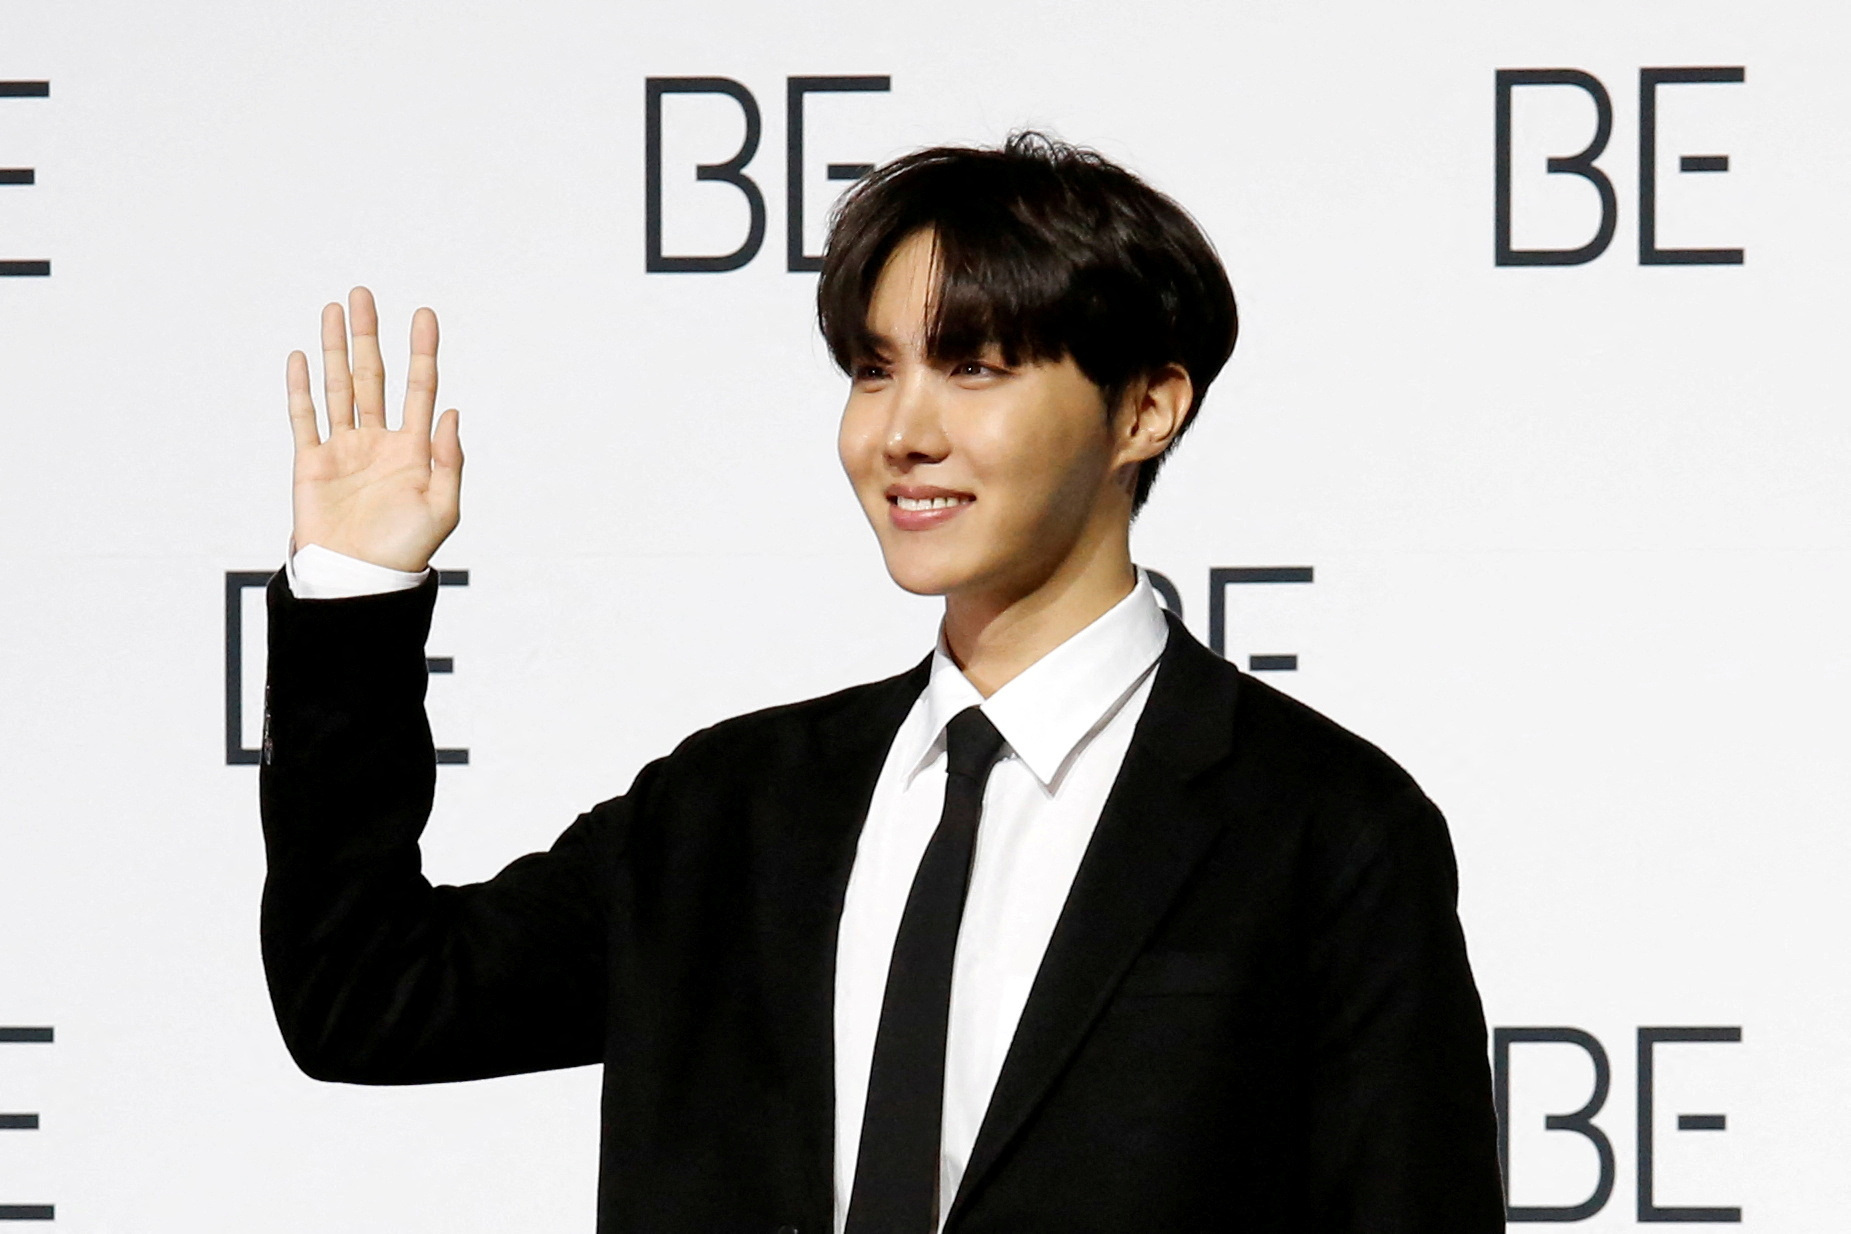 K-pop boy band BTS member J-hope poses for photograph during a news conference promoting their new album 